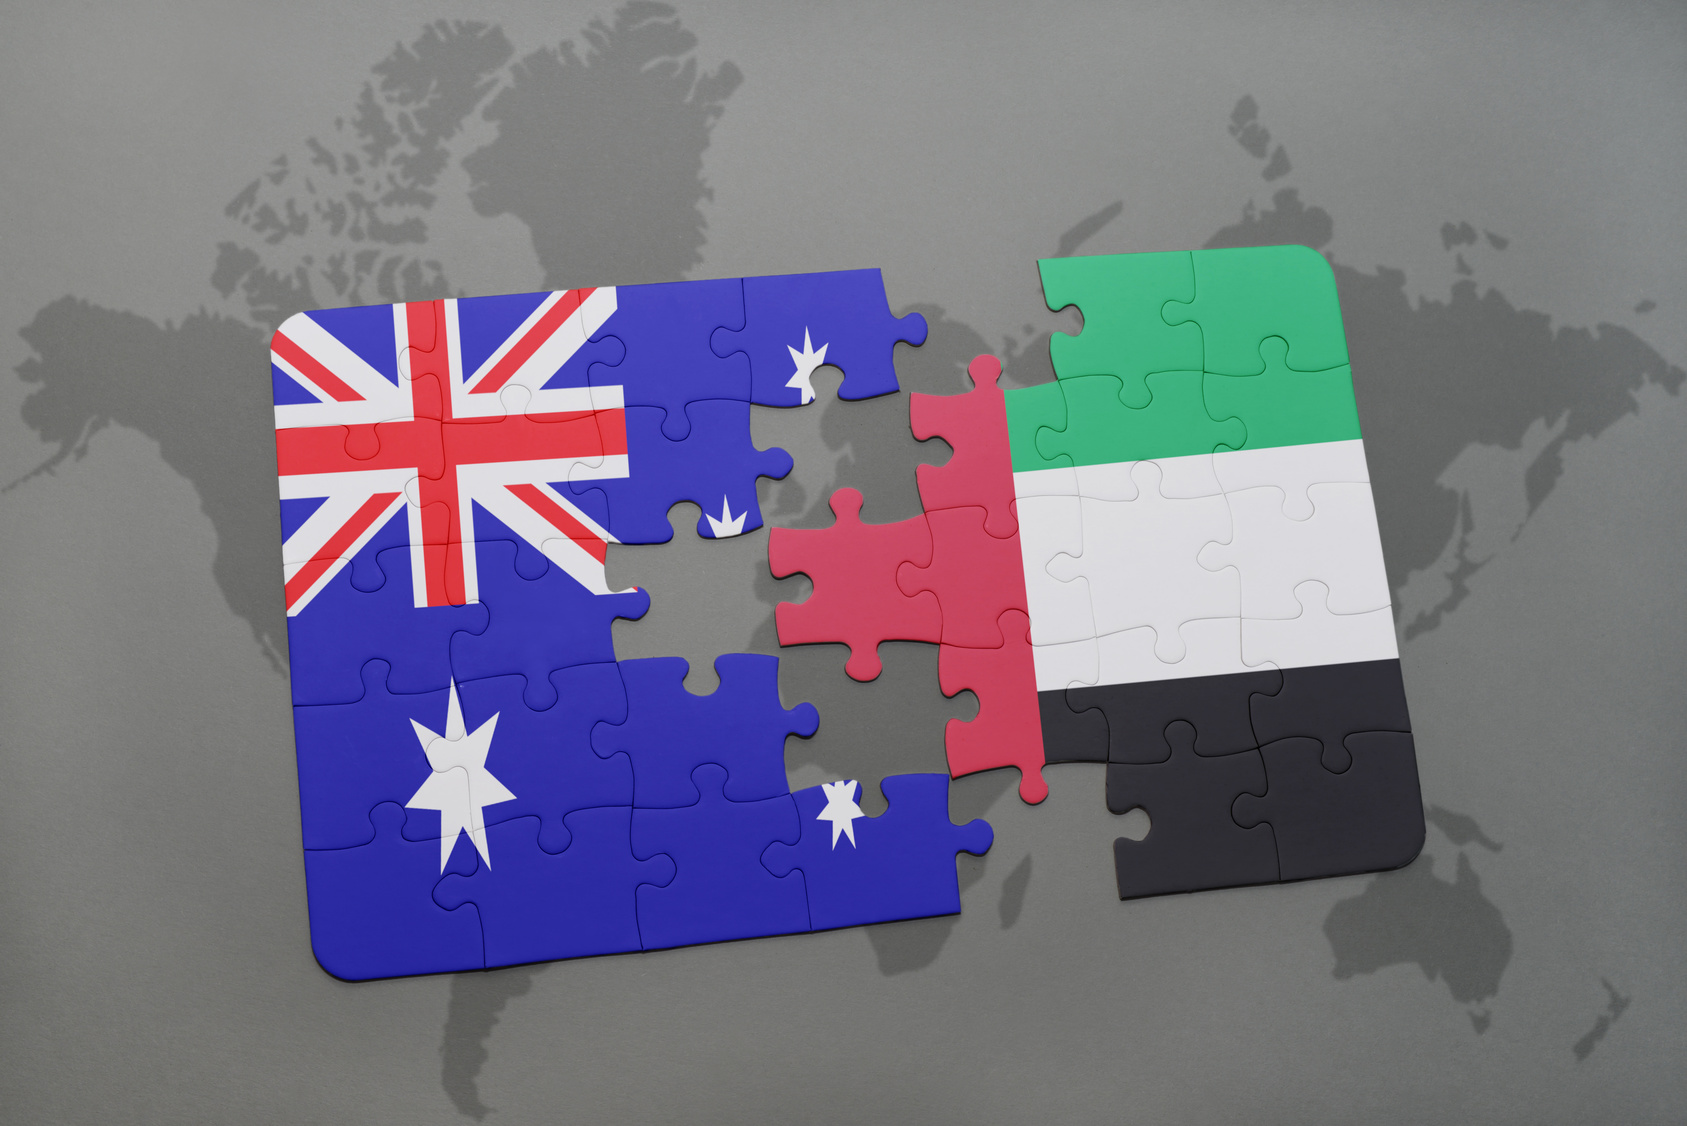 UAE is Australia’s largest trading partner in Middle East, with two-way goods and services trade worth $8.8 billion in 2015